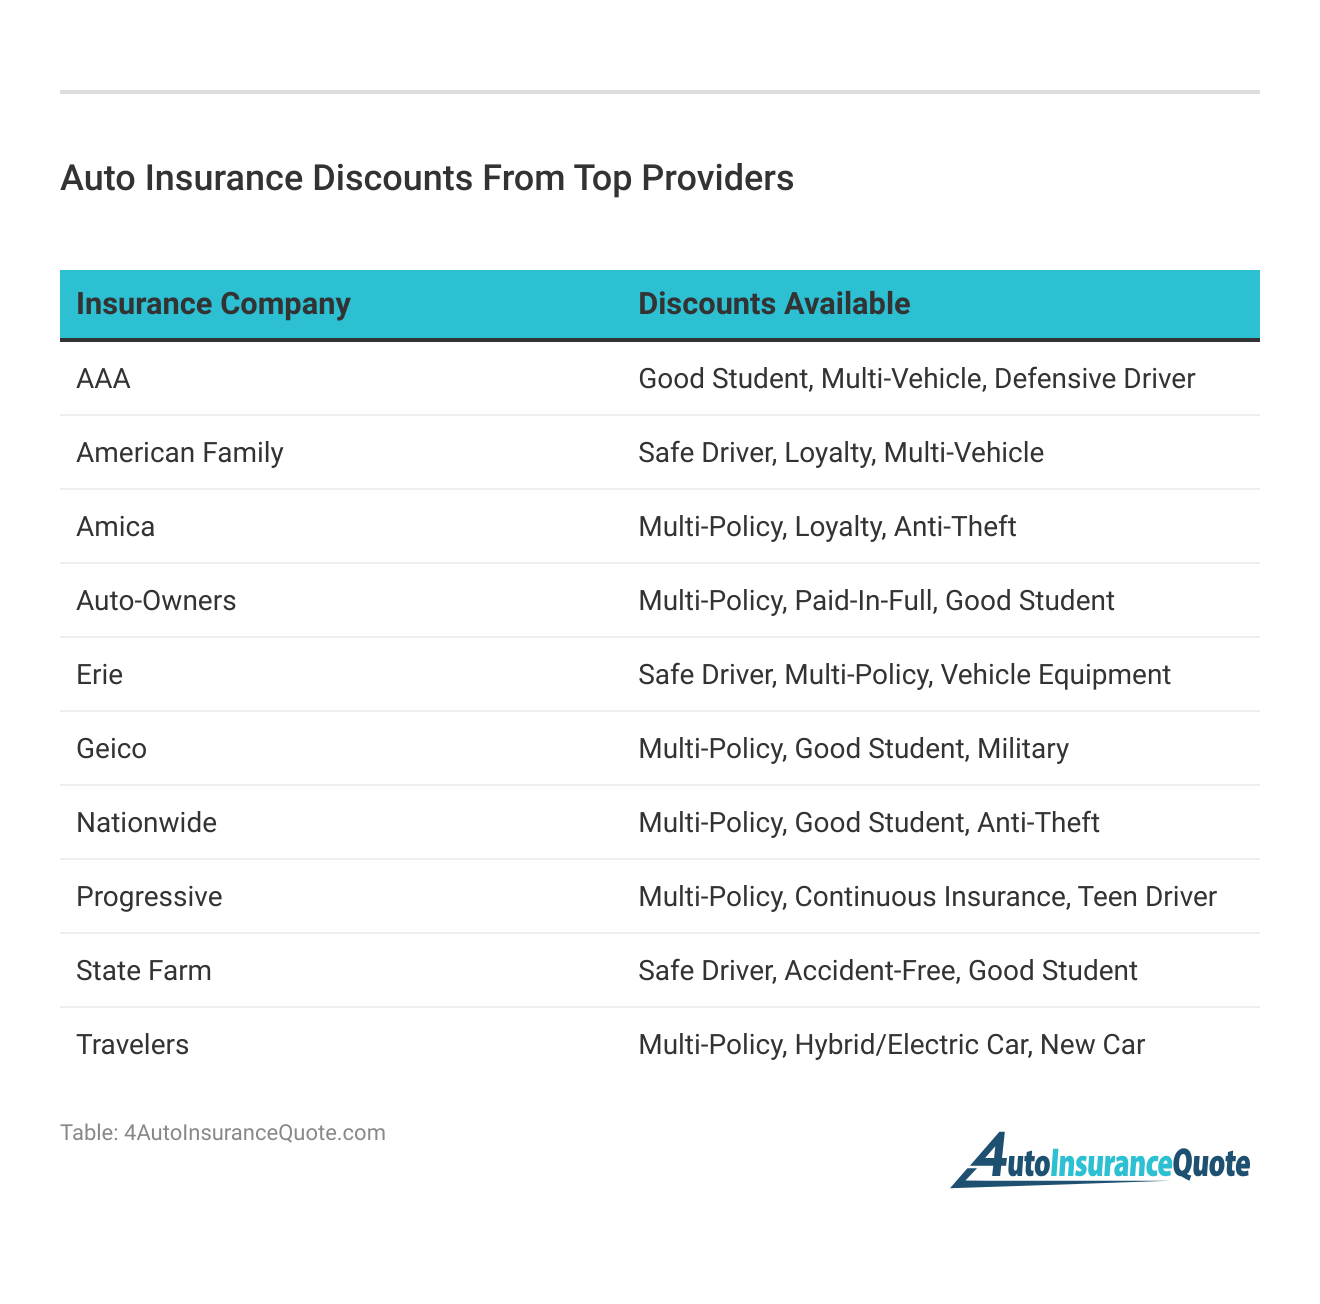 <h3>Auto Insurance Discounts From Top Providers</h3>